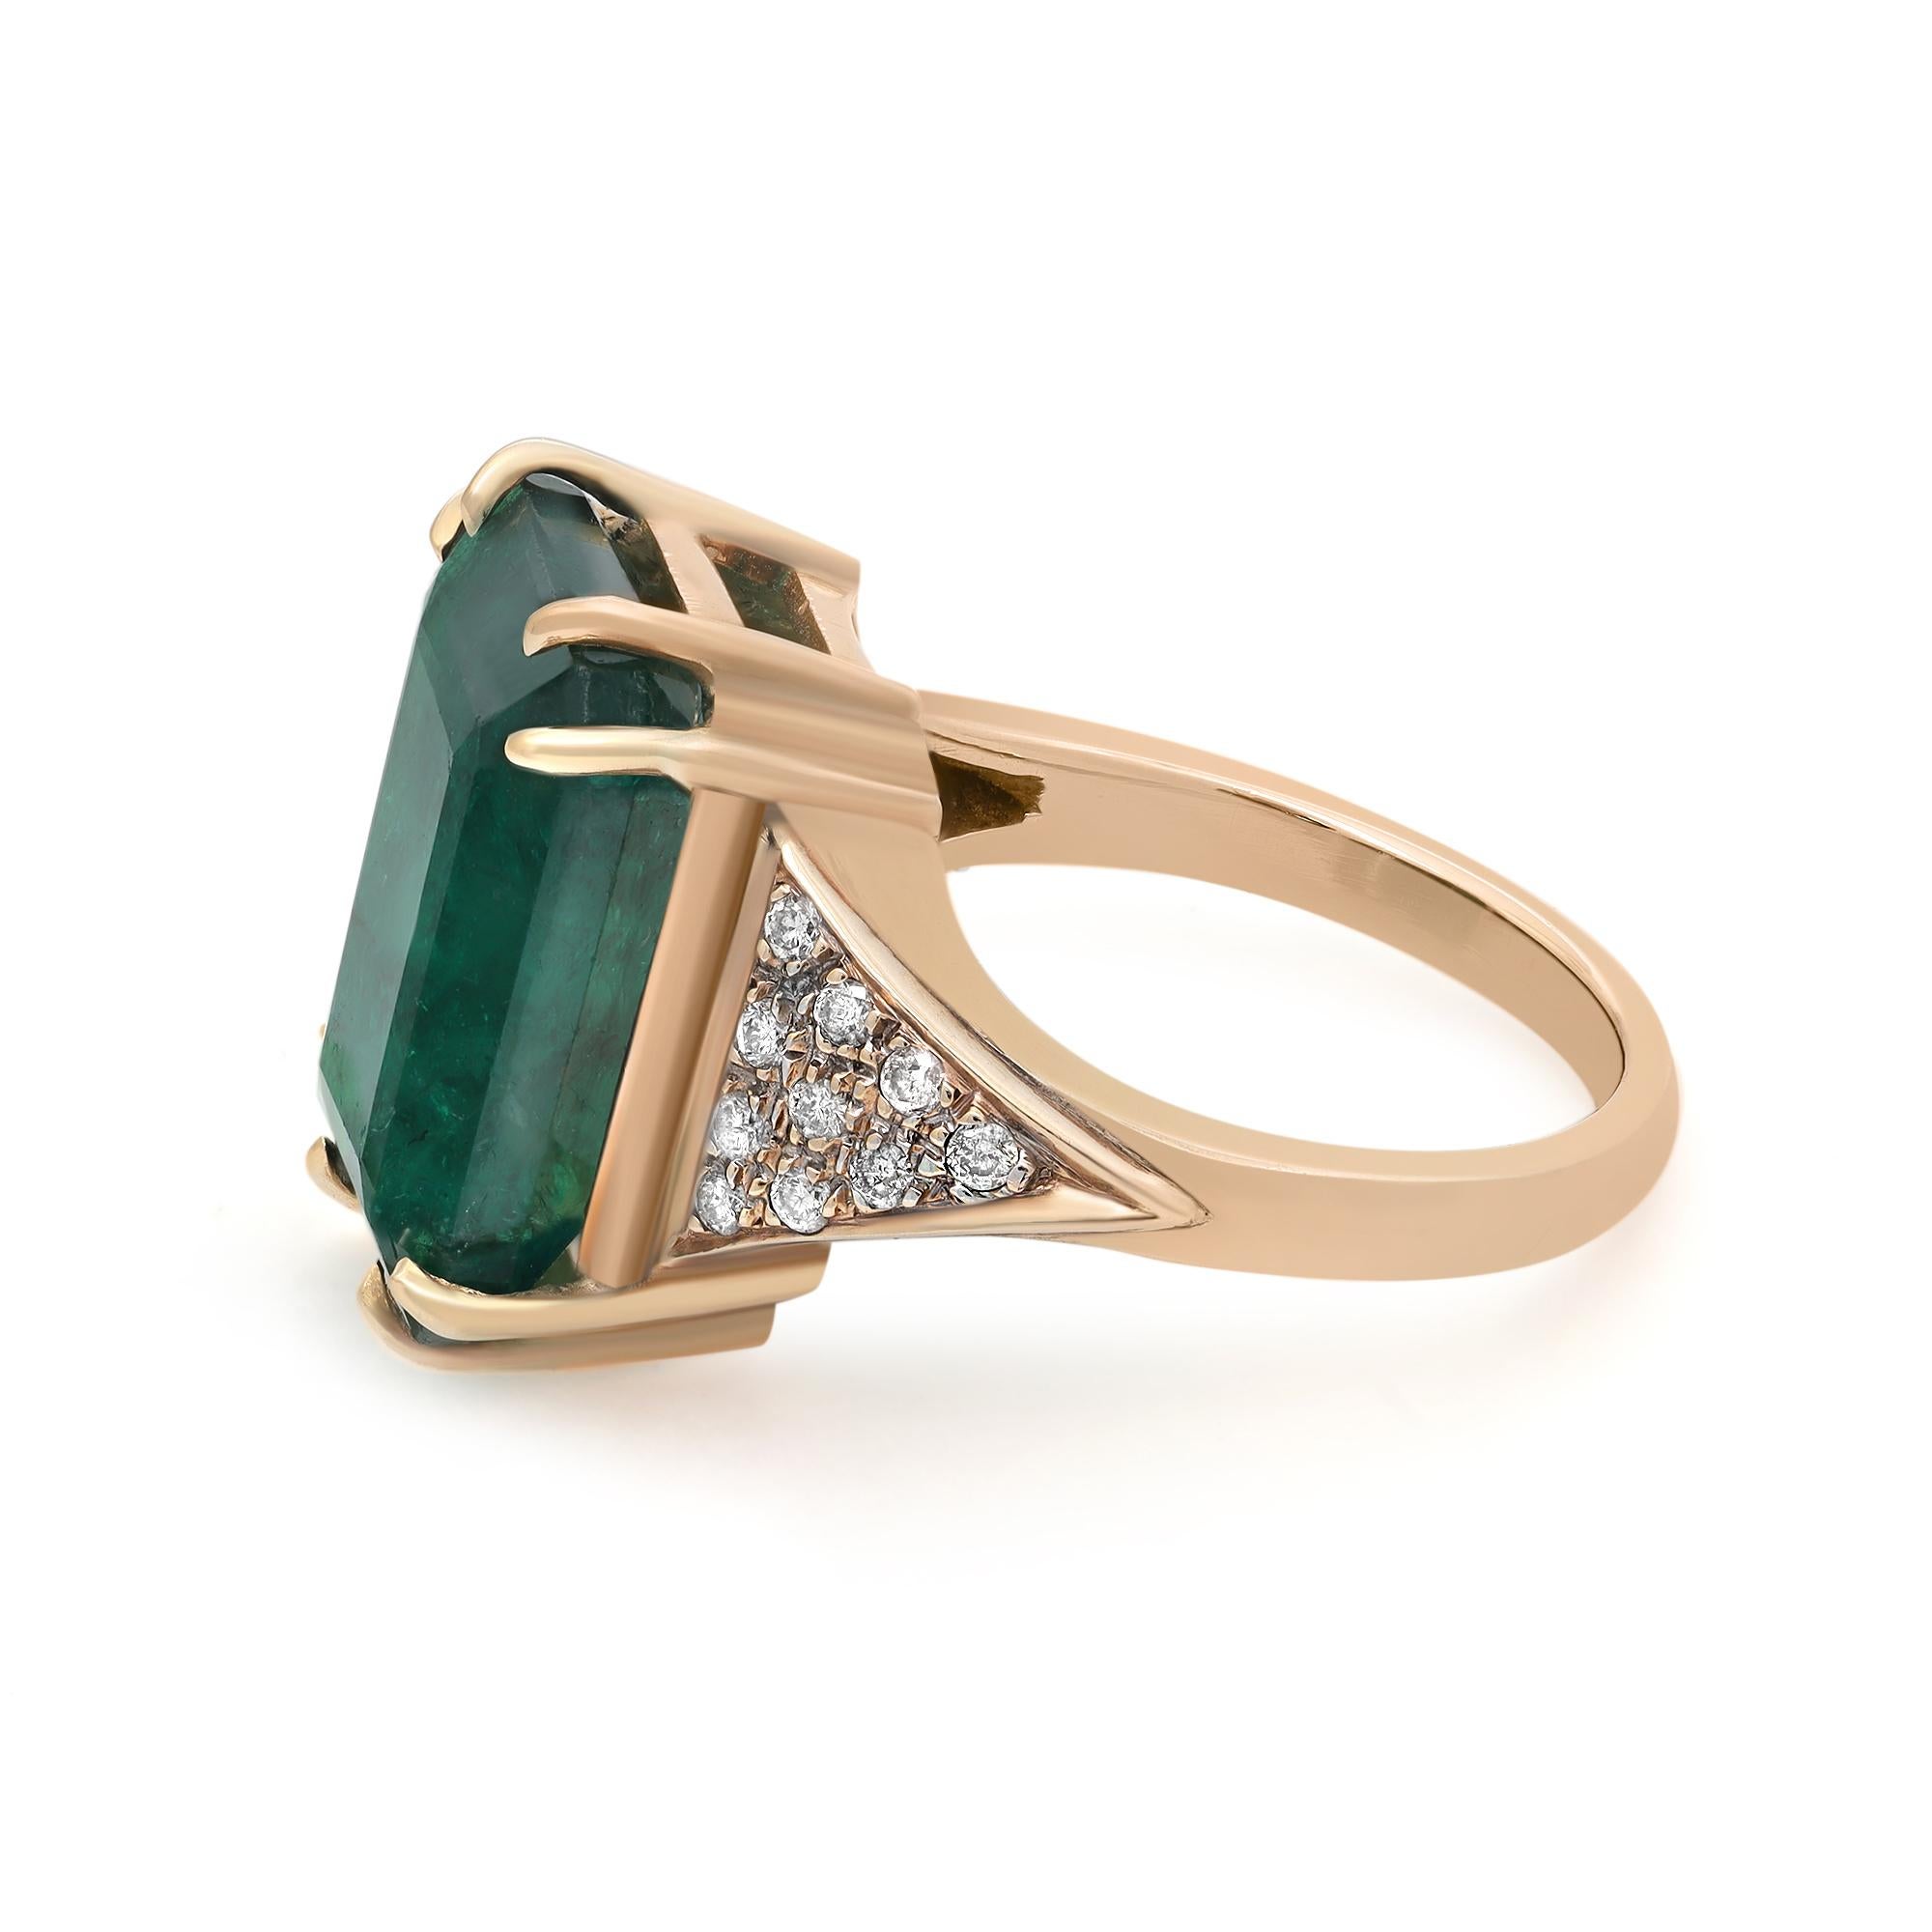 This beautiful emerald and diamond ladies ring is crafted in fine 18k yellow gold. Features an excellent prong set rectangular emerald cut emerald weighing 11.06 carats, flanked with 10 tiny round cut diamonds on each side weighing 0.20 carat.